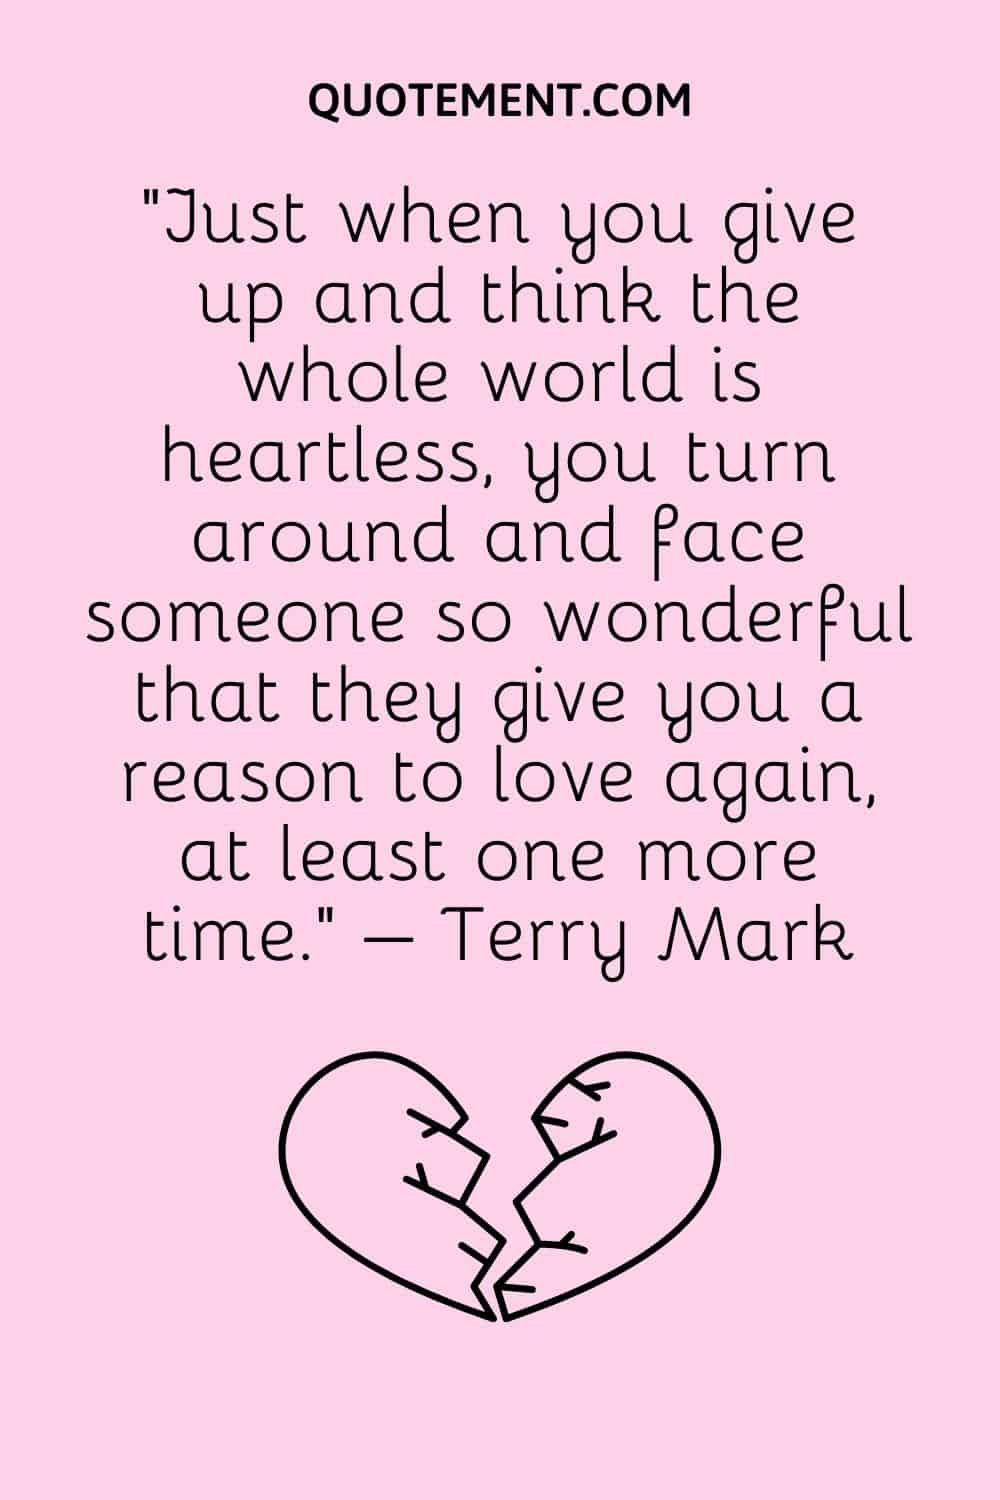 “Just when you give up and think the whole world is heartless, you turn around and face someone so wonderful that they give you a reason to love again, at least one more time.” – Terry Mark